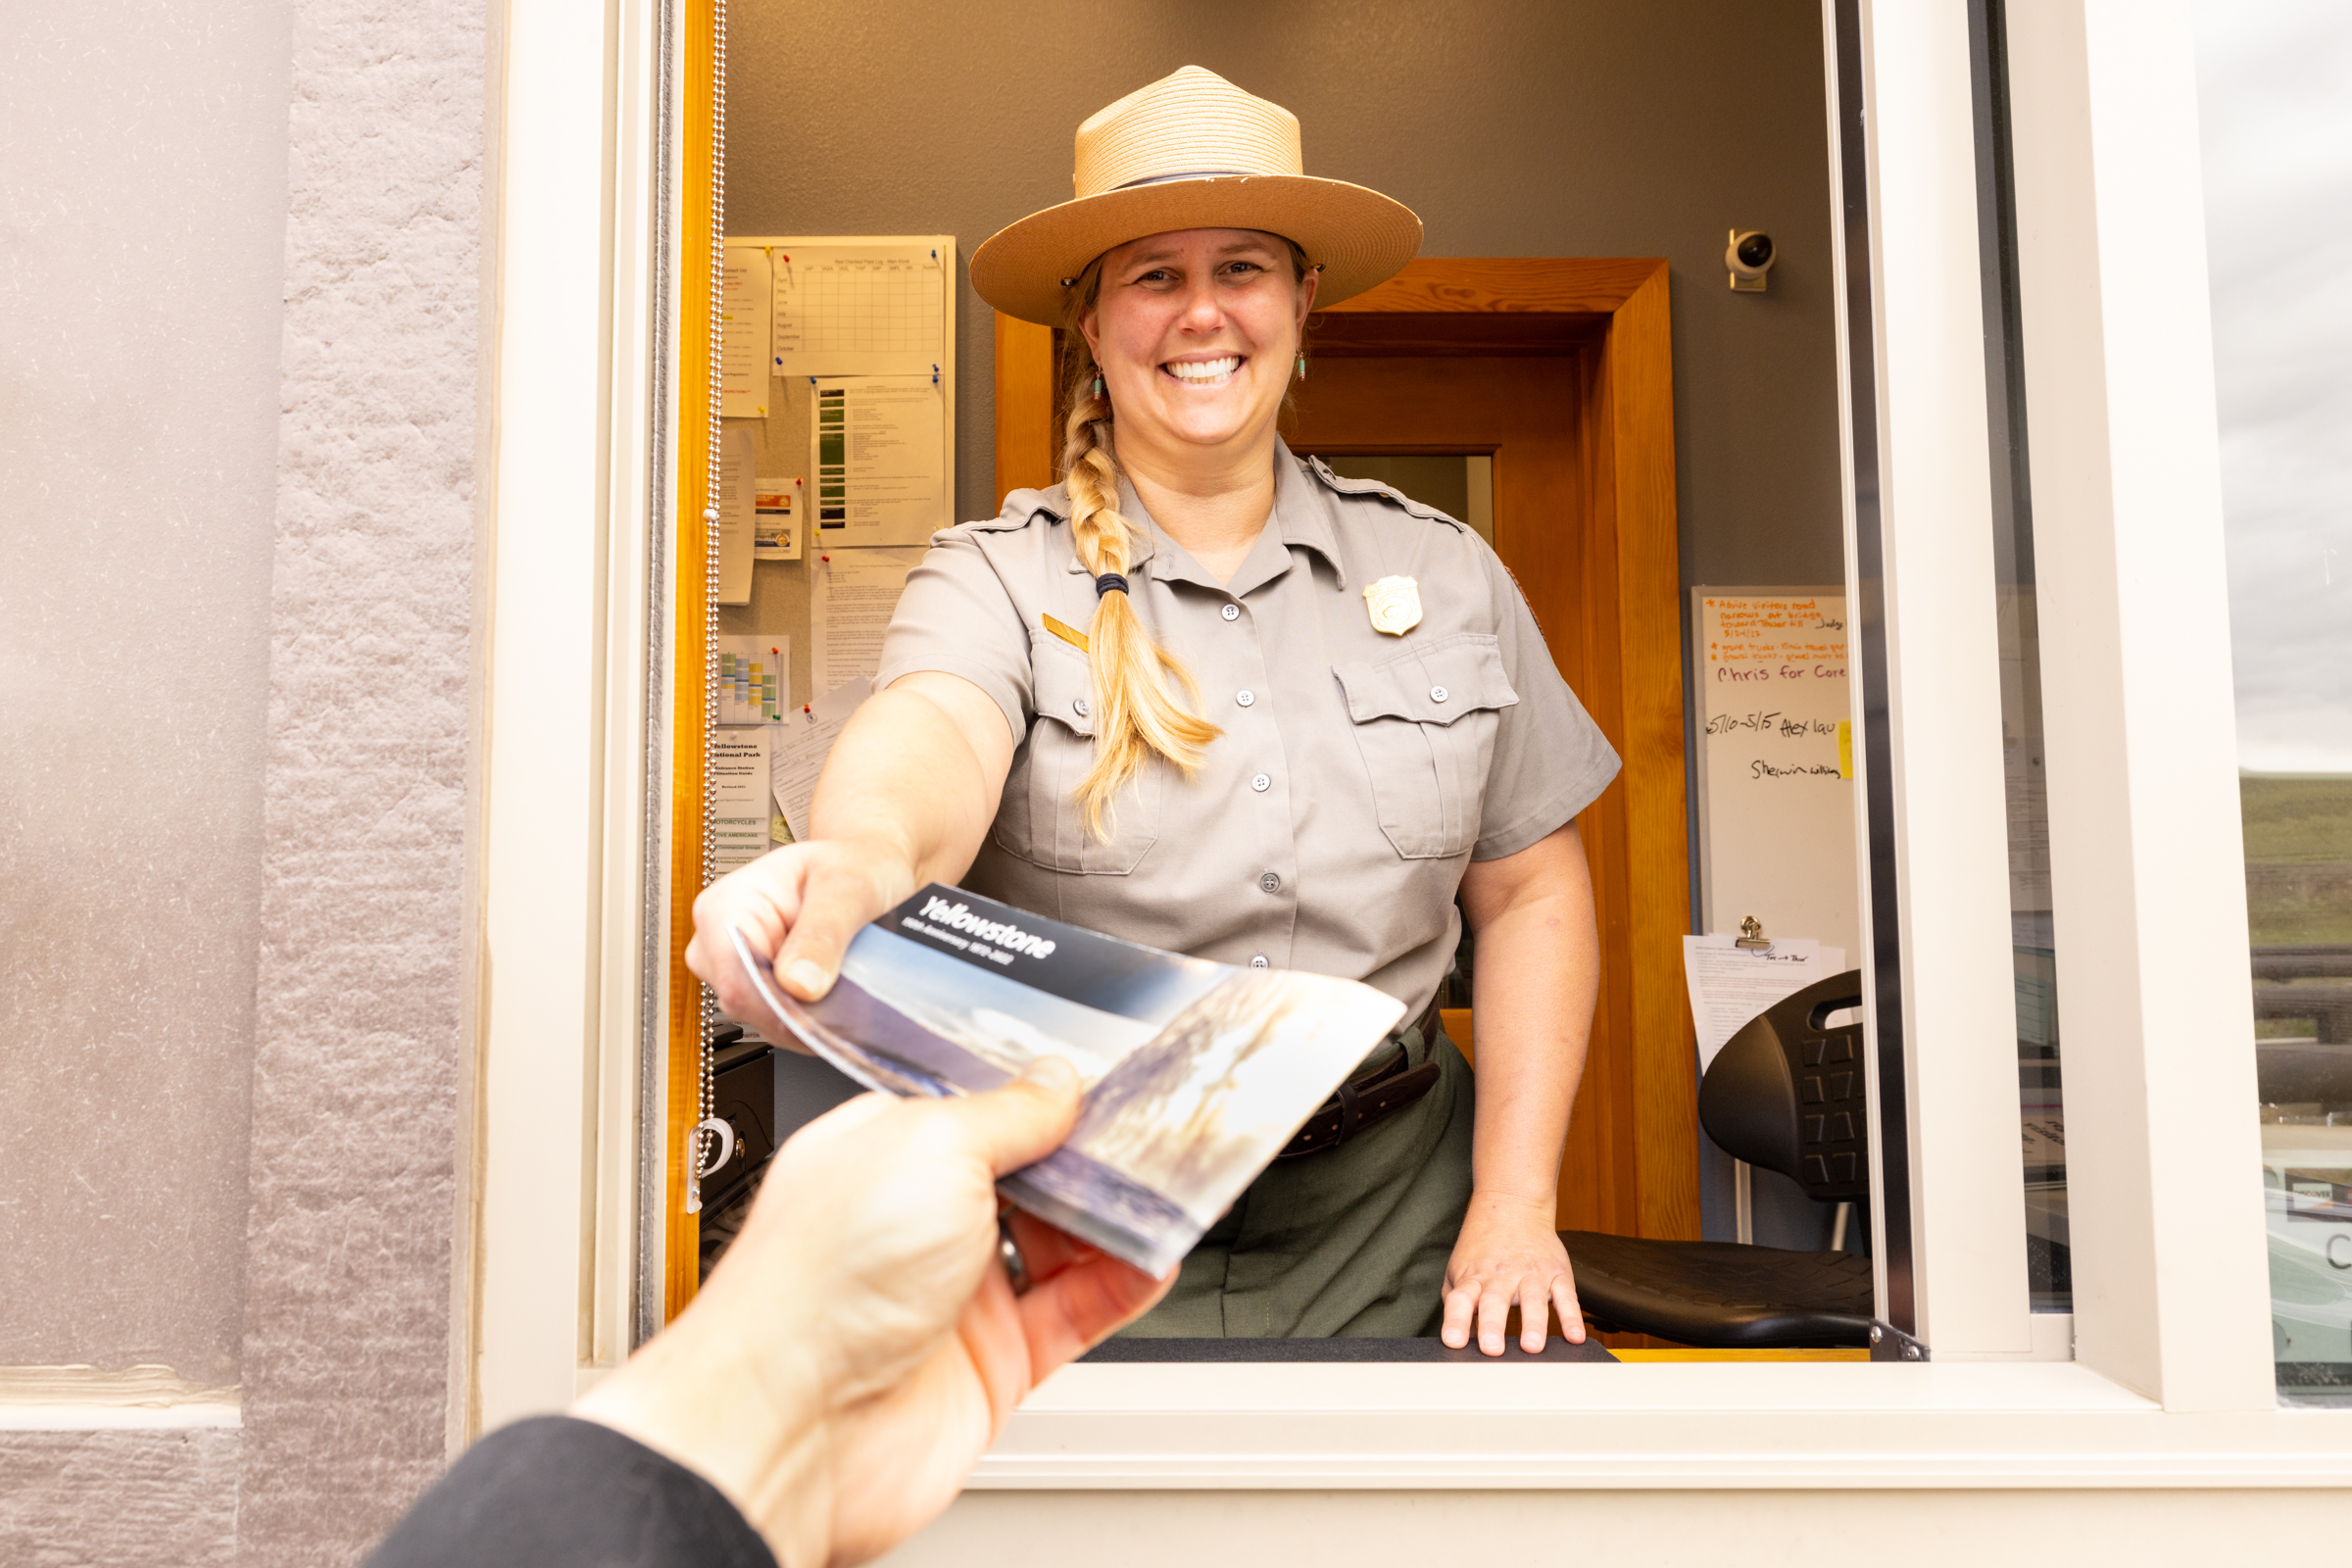 a park ranger handing out a newspaper at an entrance station